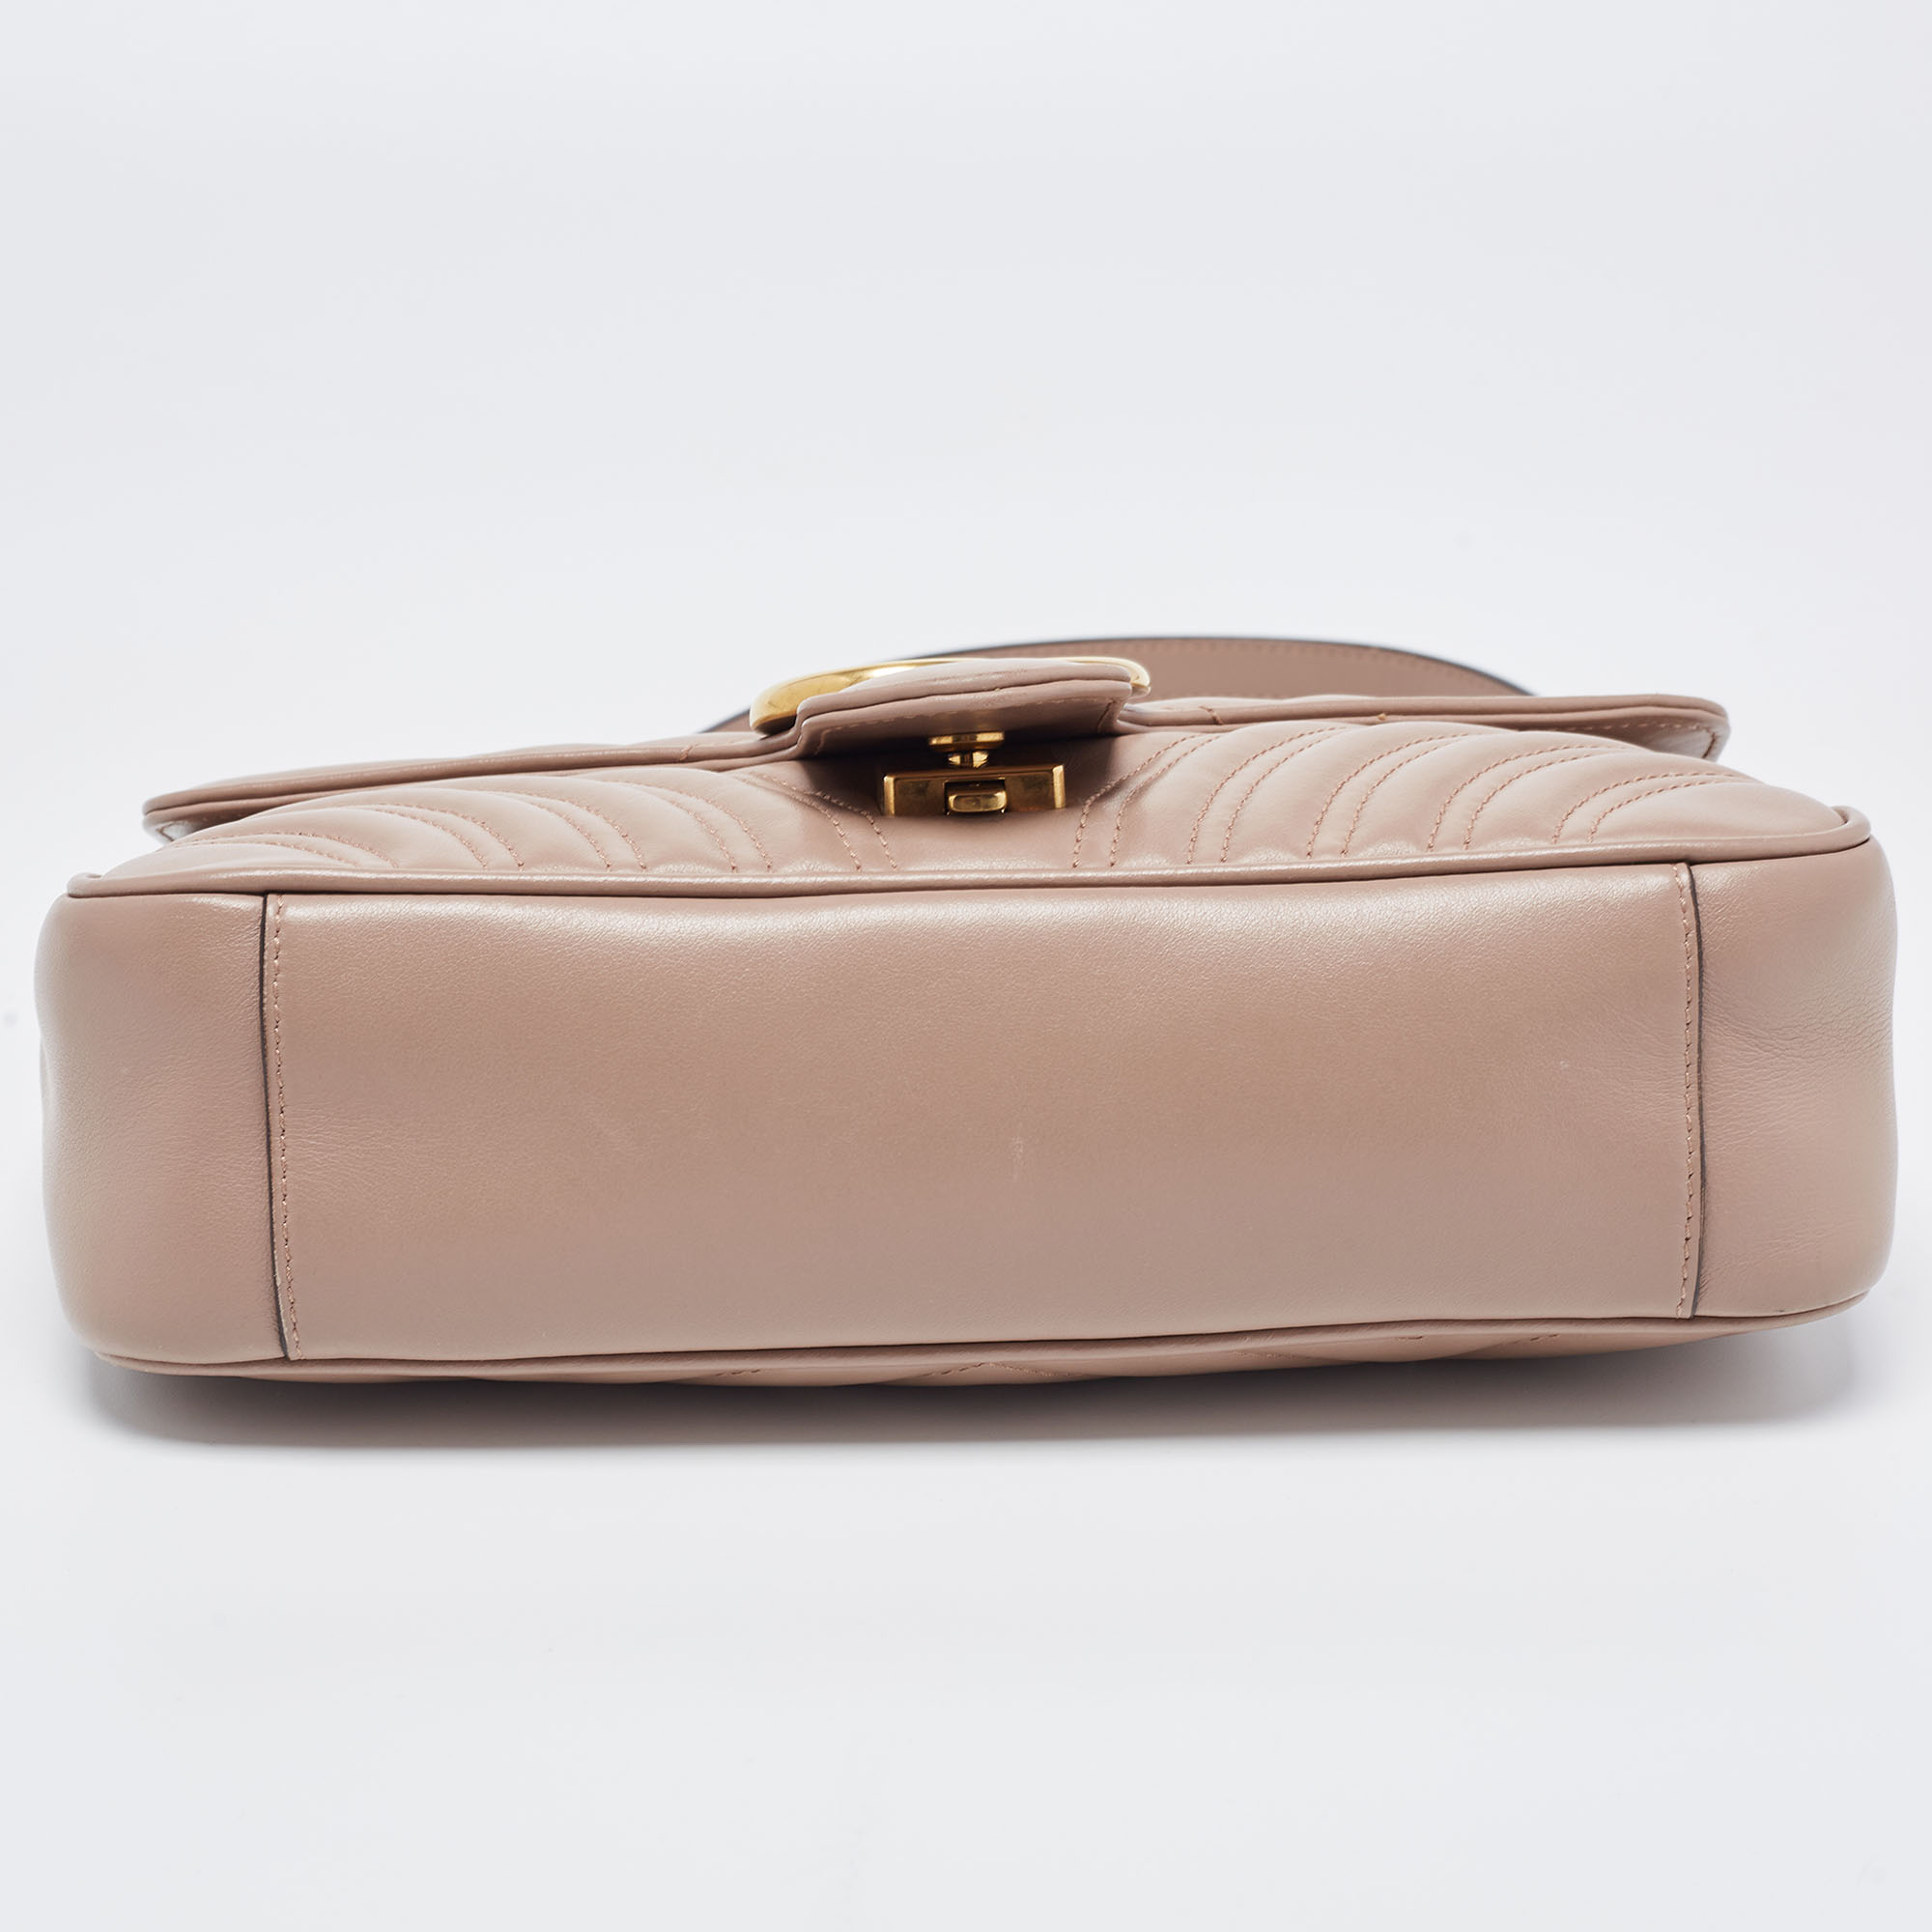 Gucci Dusty Pink Matelassé Leather Small GG Marmont Shoulder Bag